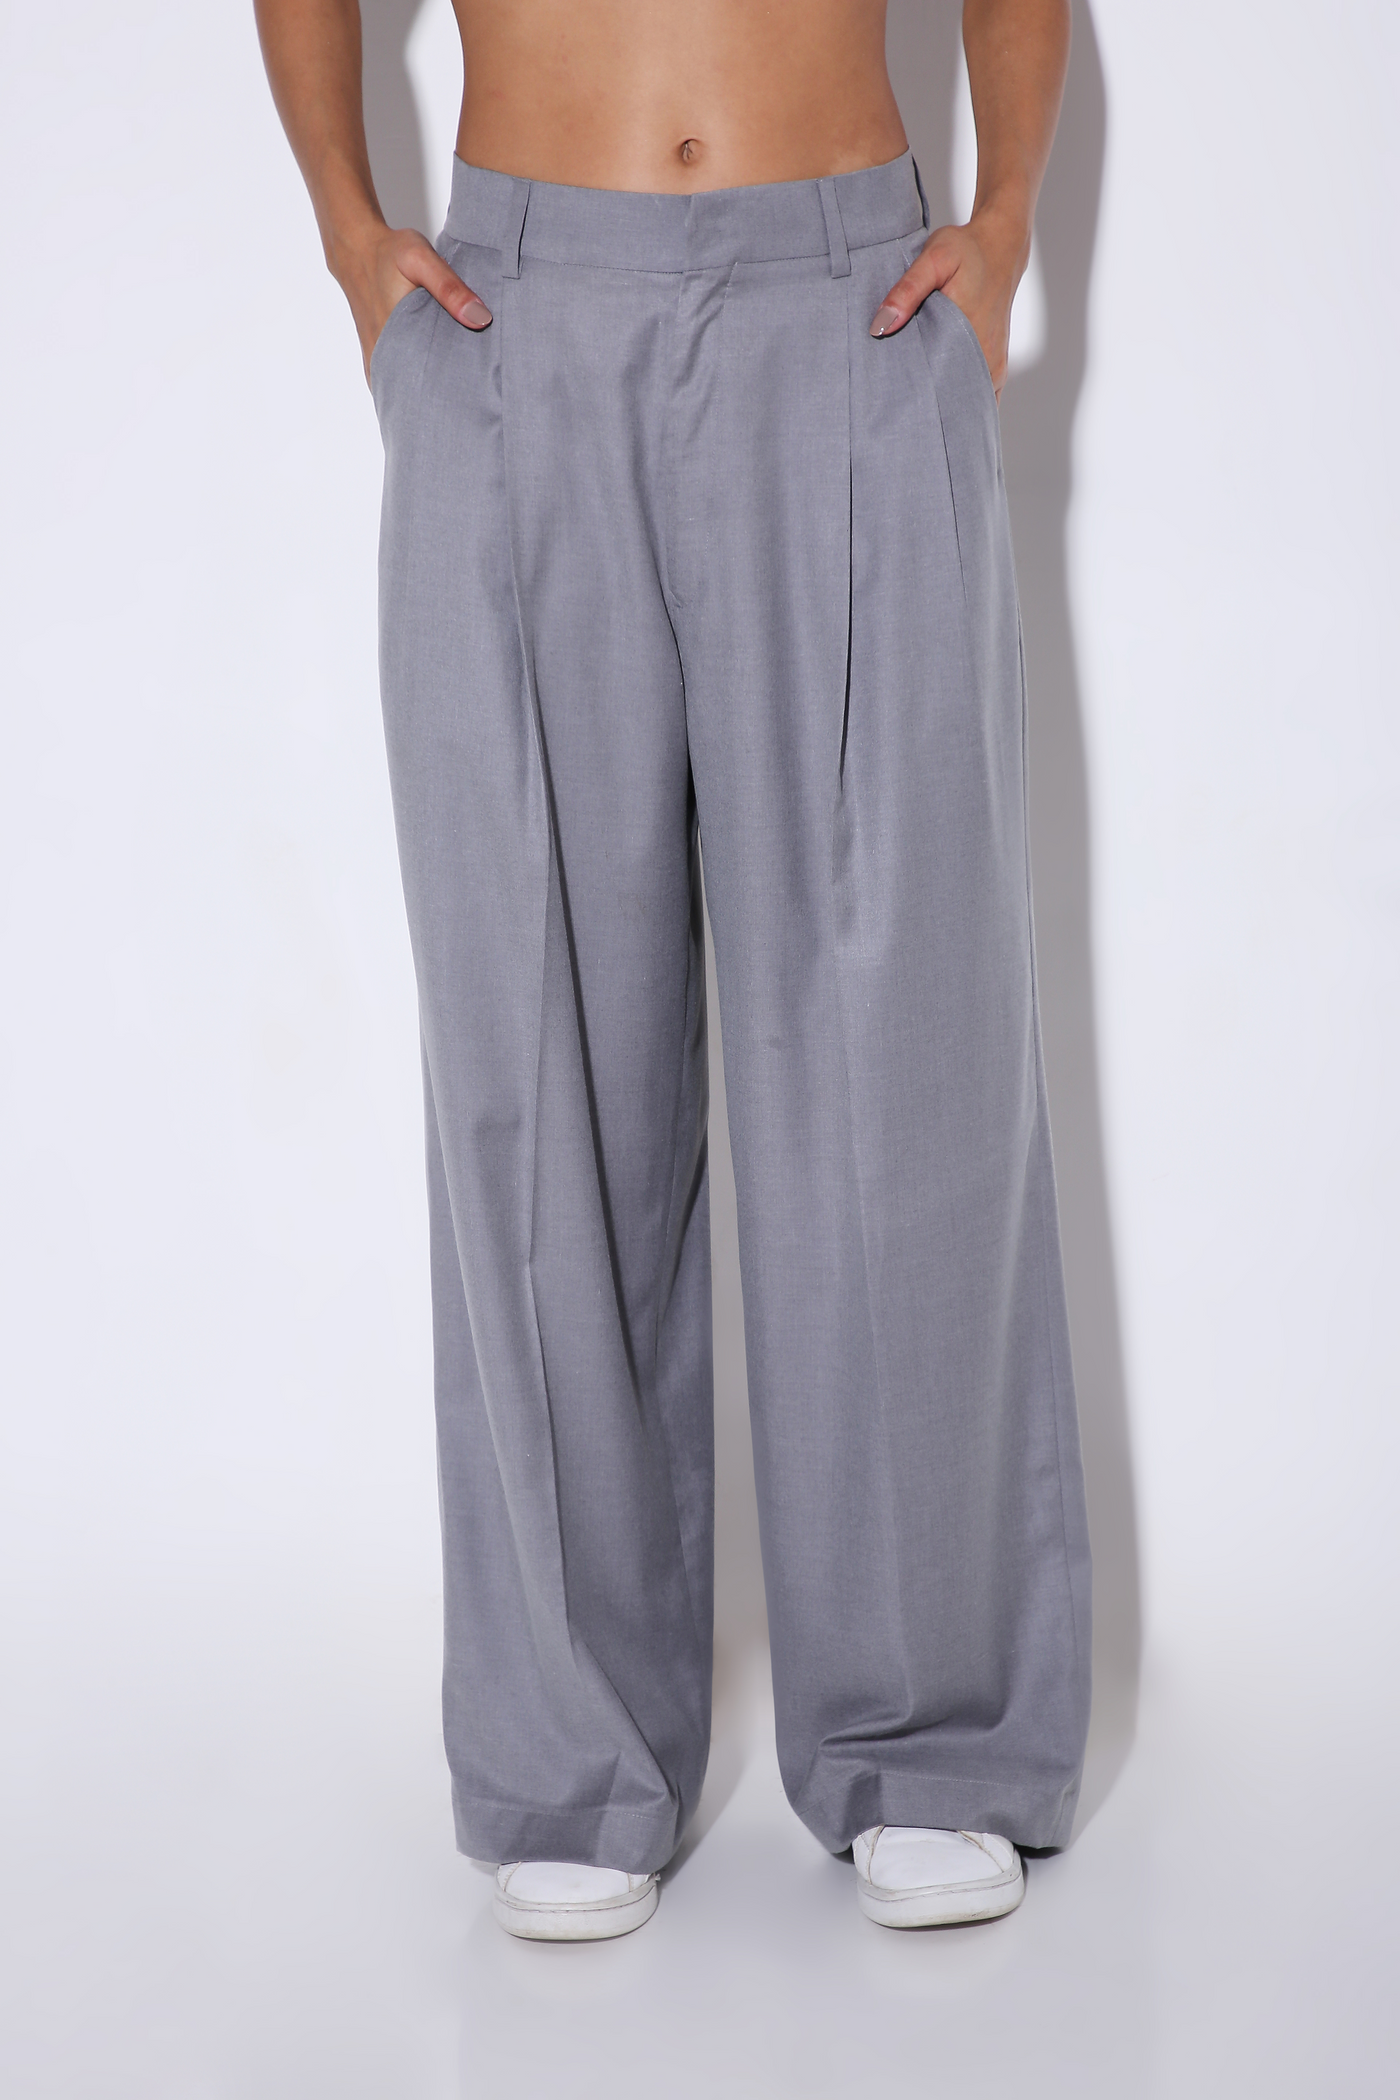 Legs for Days - Wide Legged Pants - Solid-trousers - Monokrom